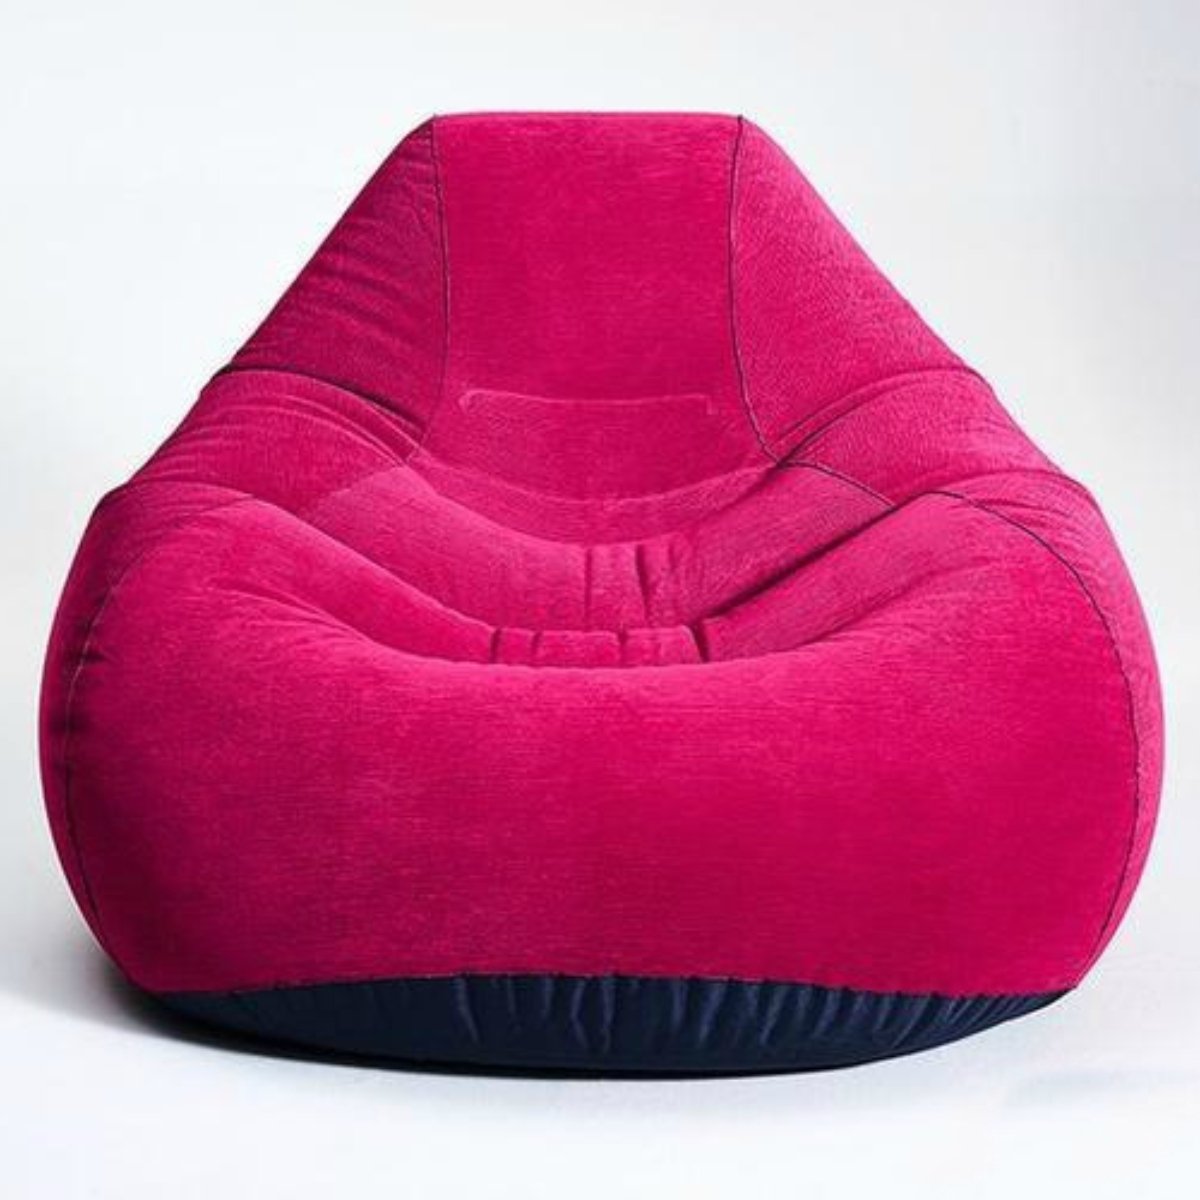 Inflatable SInge Lazy Couch Sofa Chair - Westfield Retailers